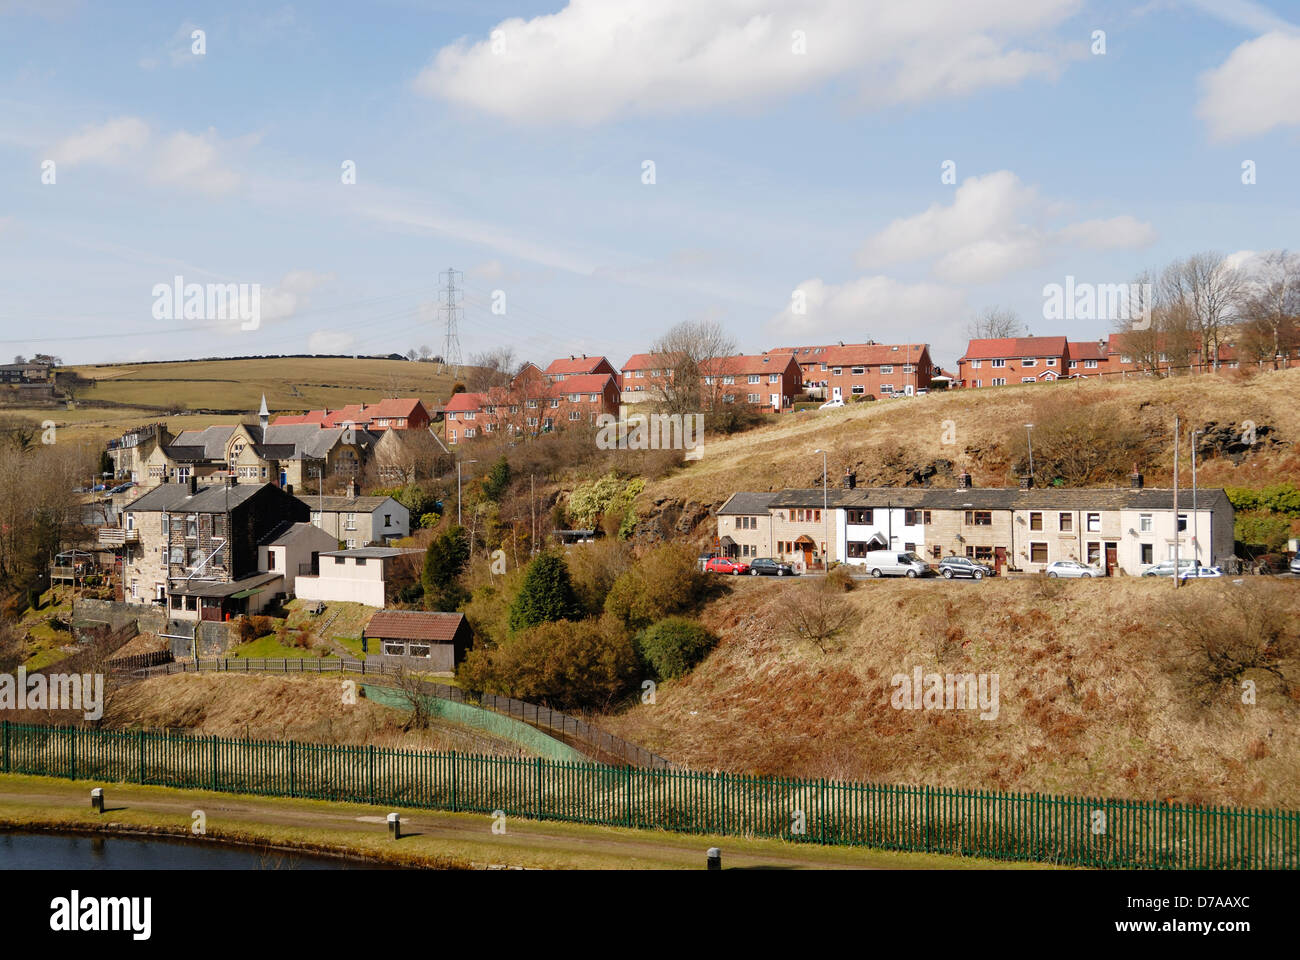 Littleborough, near Rochdale Lancashire showing a contrast between old and new housing stock. Stock Photo